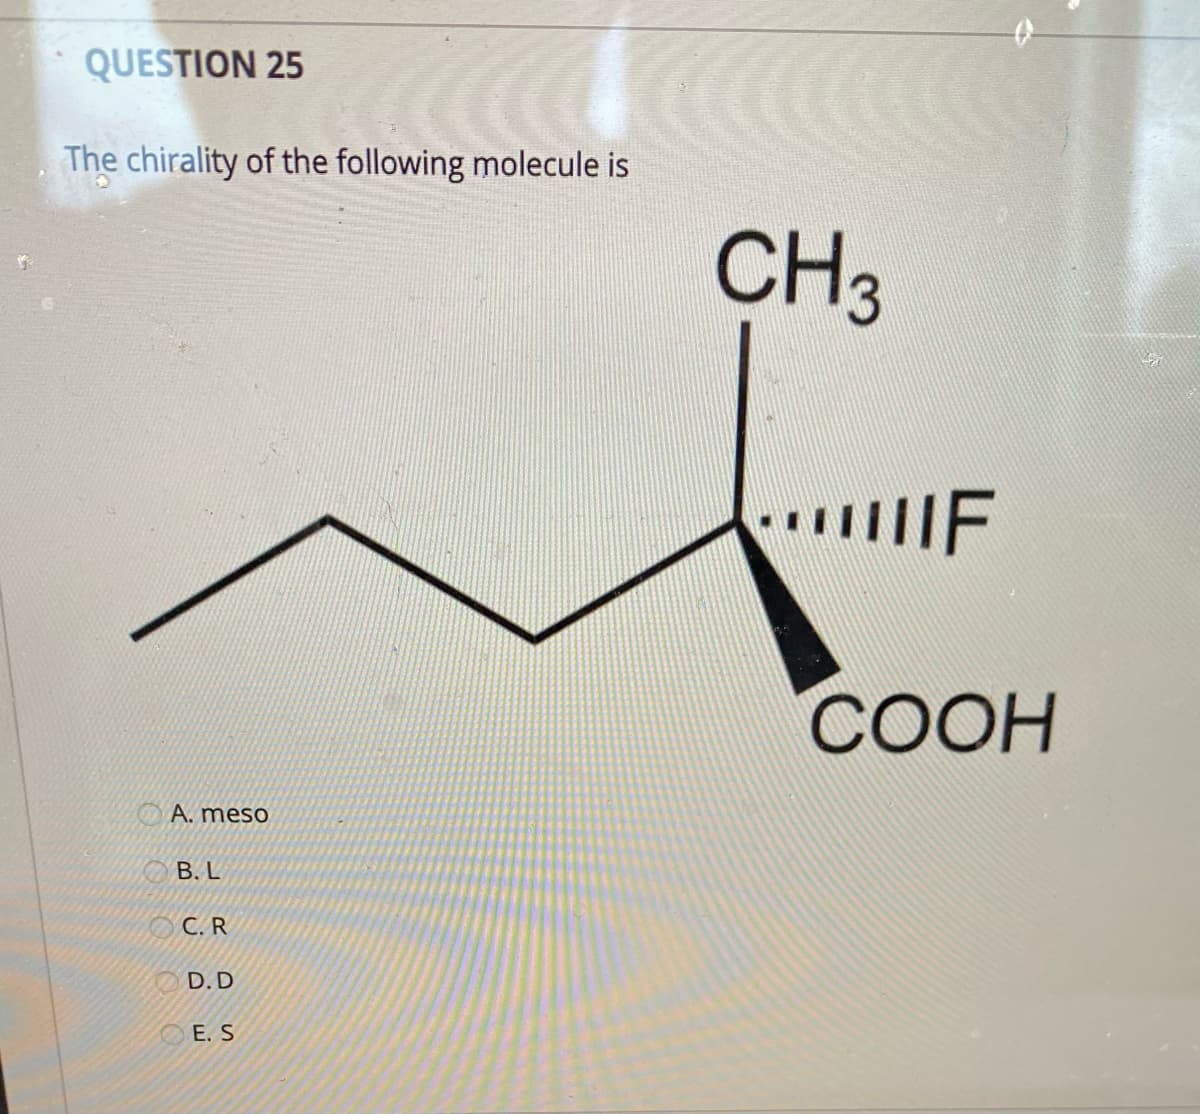 QUESTION 25
The chirality of the following molecule is
CH3
COOH
O A. meso
В. L
С.R
D.D
E. S
